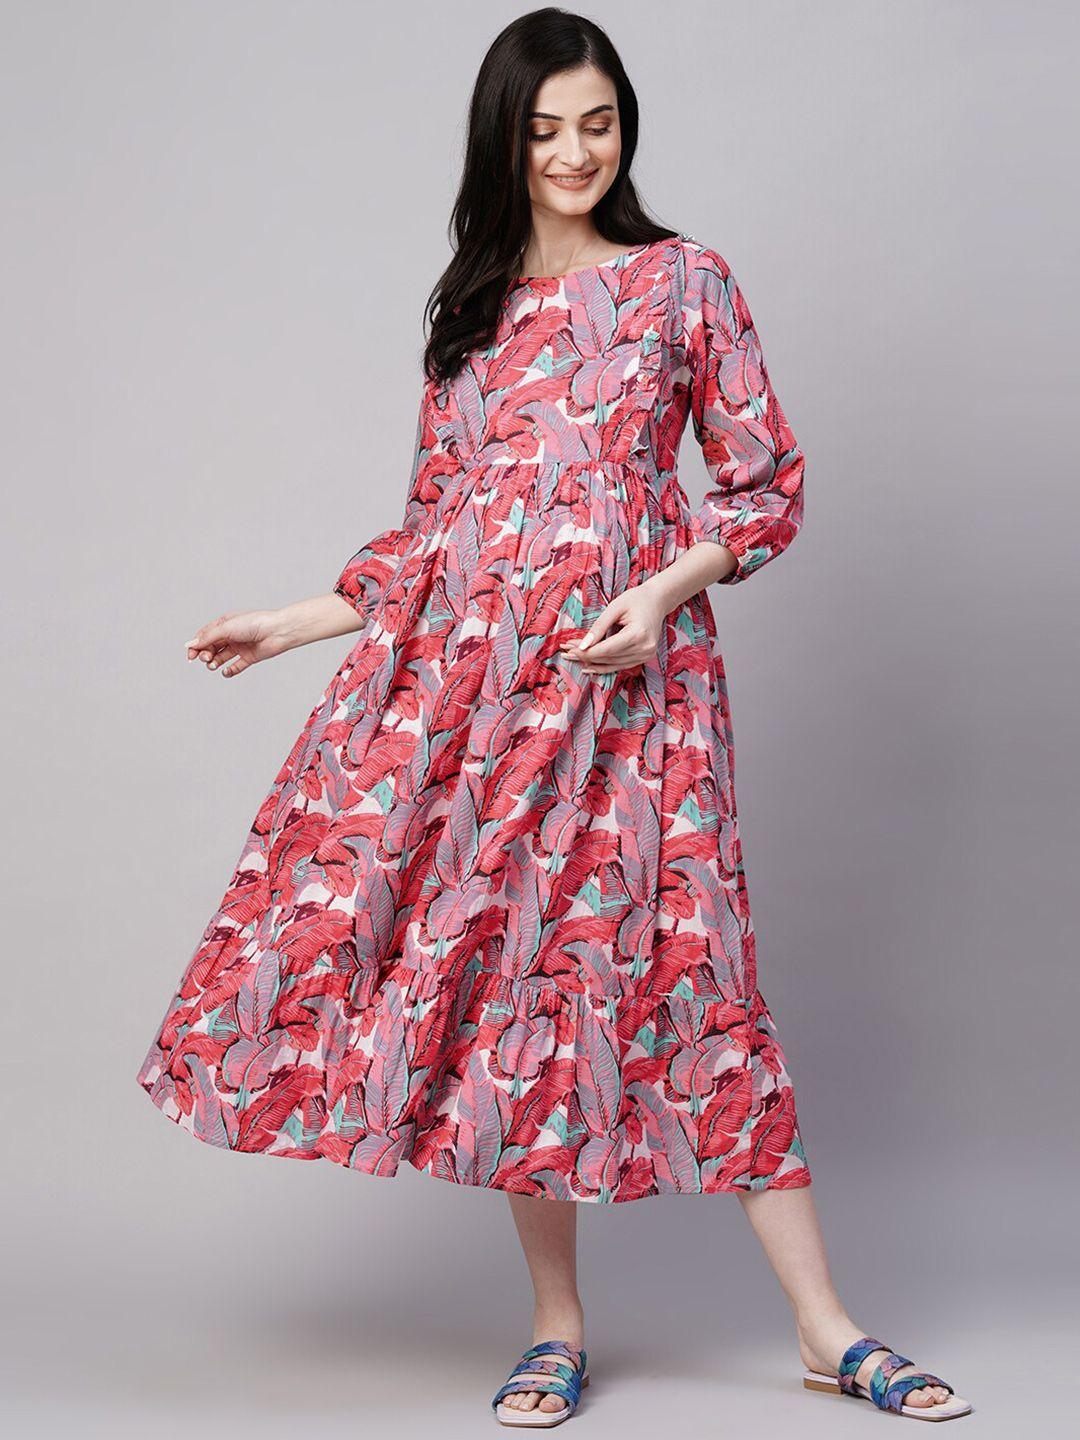 aanyor florals print puff sleeves gathered detail cotton maternity fit and flare dress